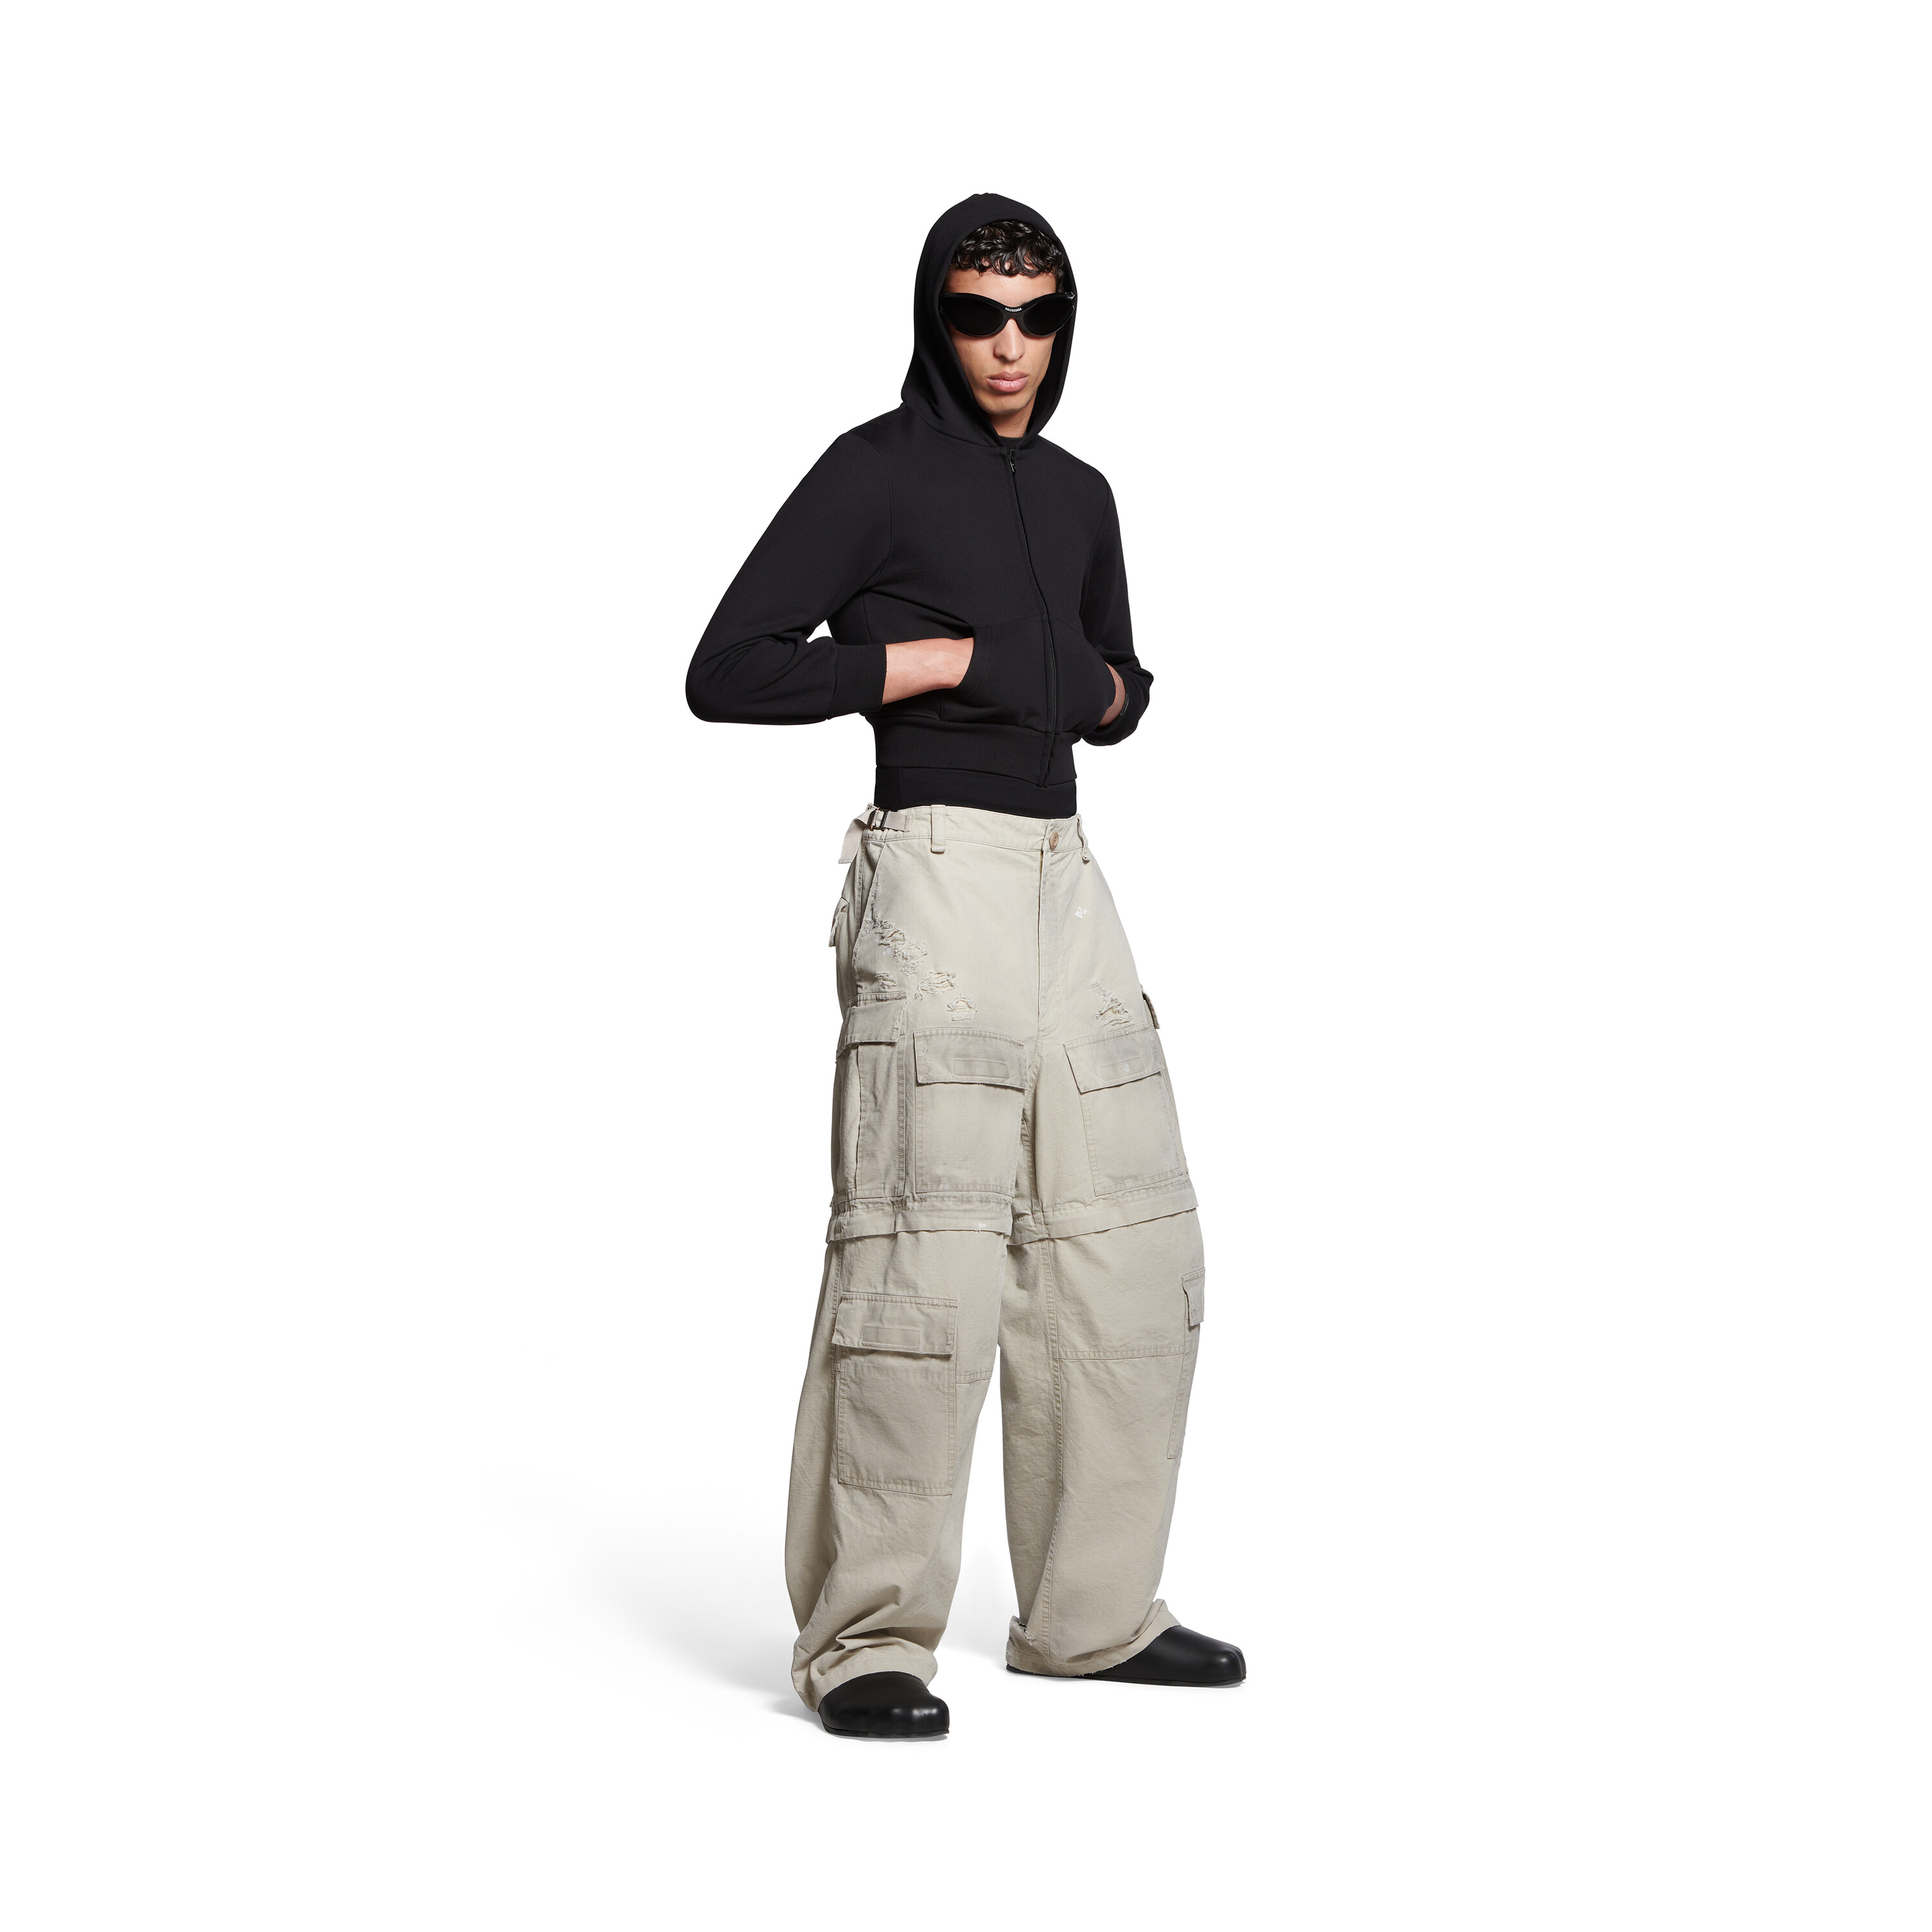 Black 5-in-1 Convertible Zip-Off Cargo Pants – Tunnel Vision